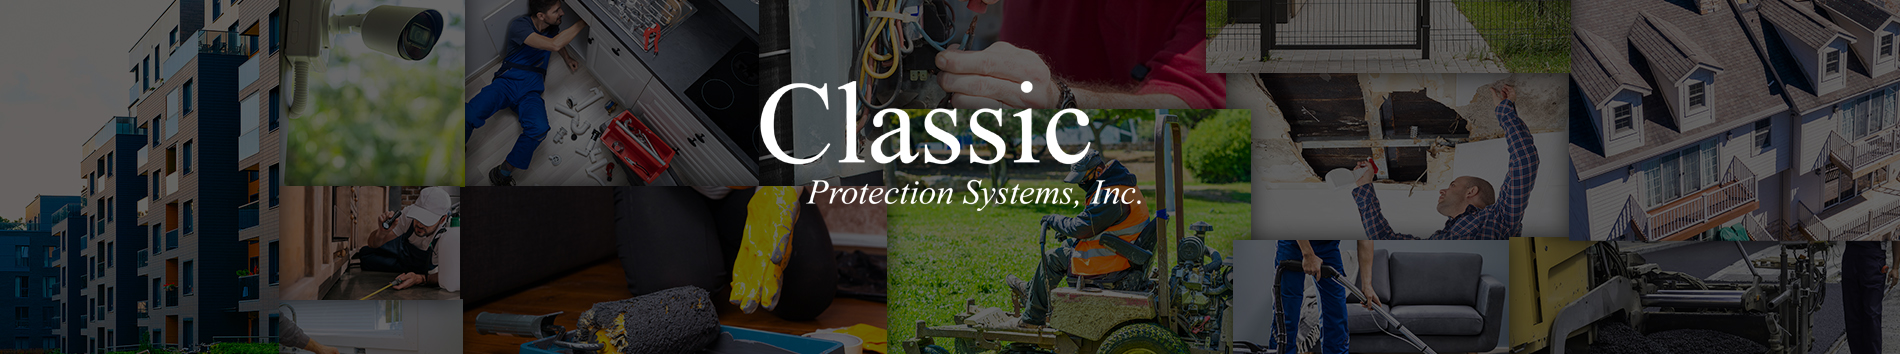 Classic Protection Systems Inc.